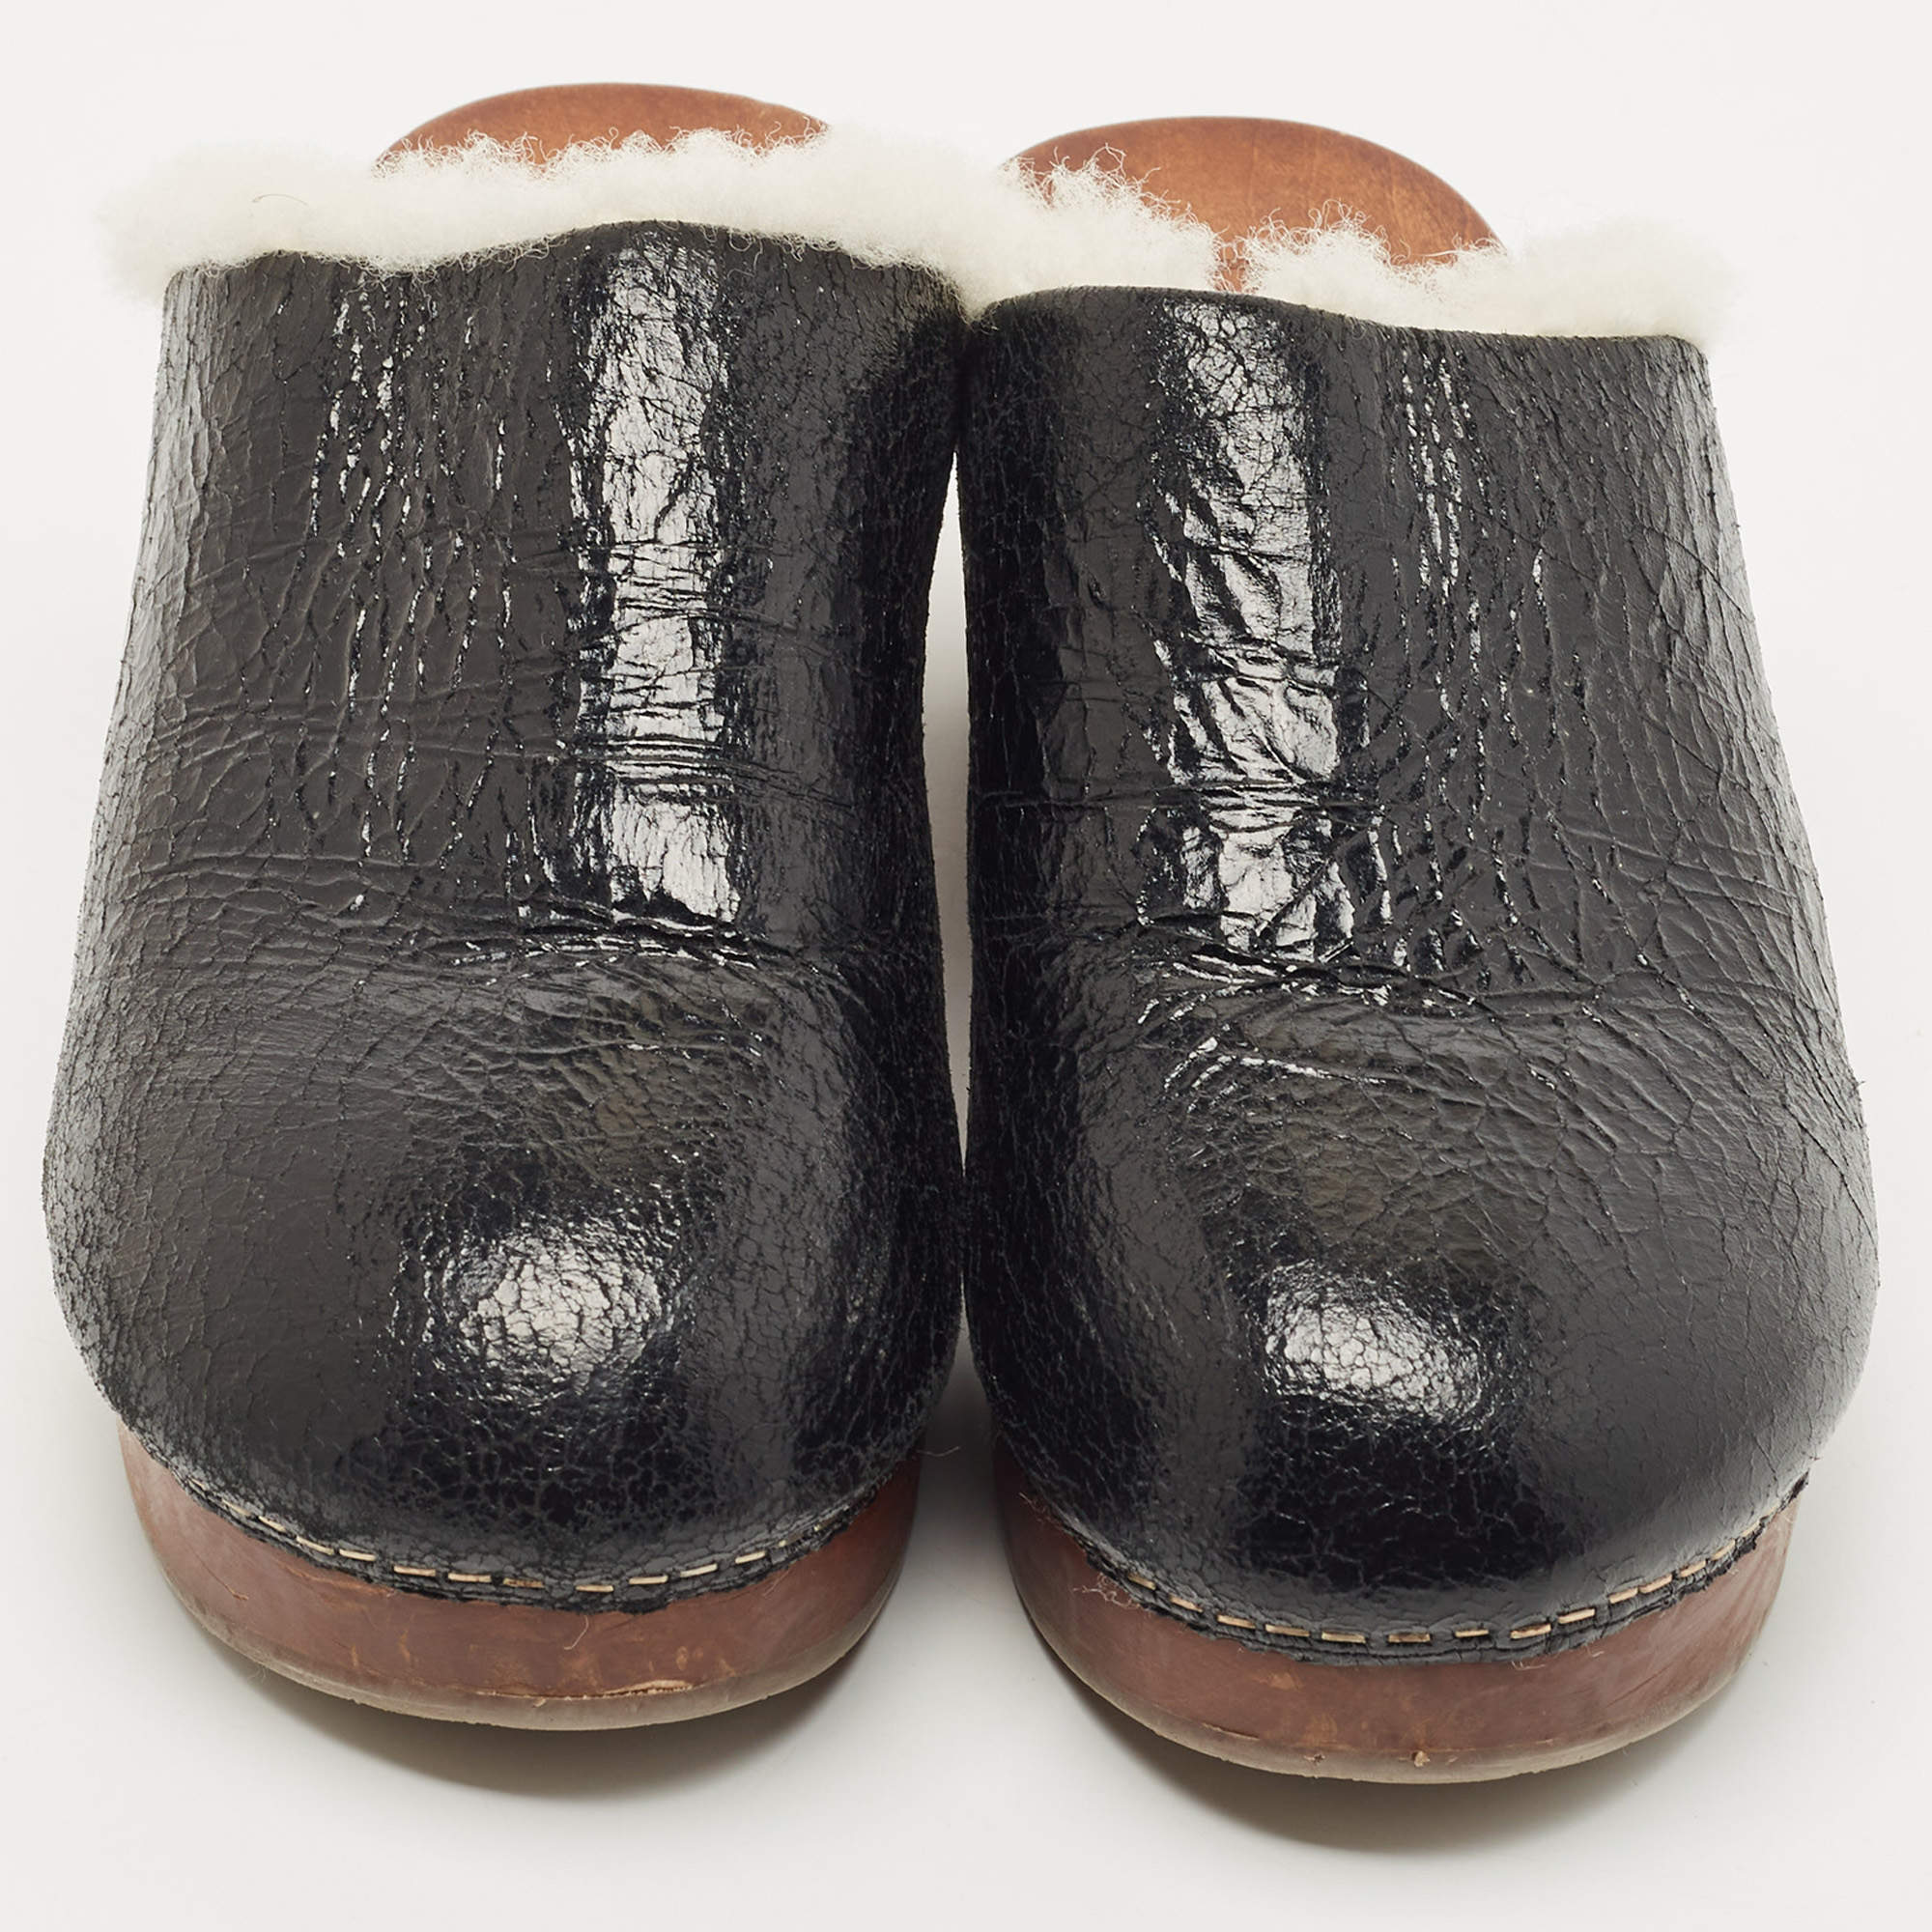 Chanel Black Leather and Fur Slip On Clogs Size 39 Chanel